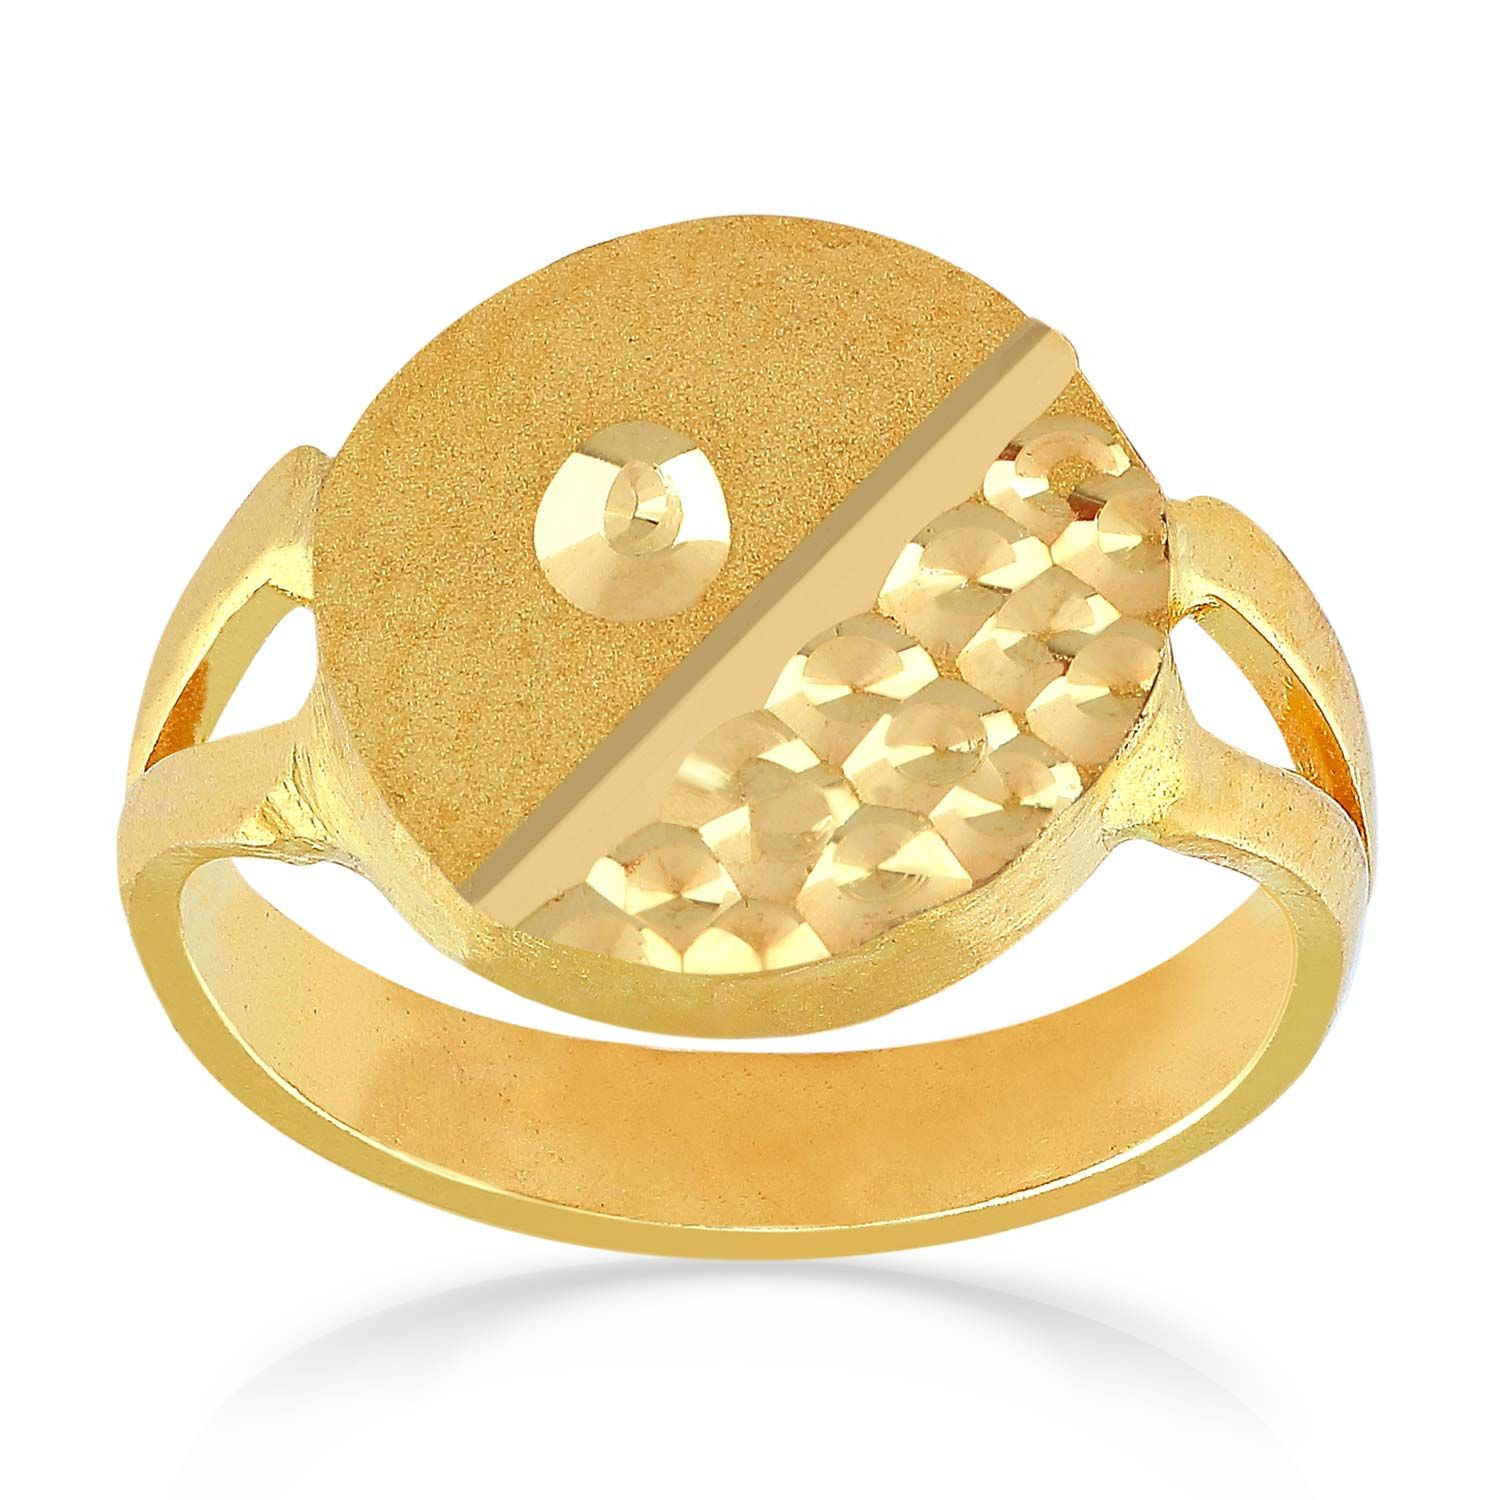 HIGHLY 1 GRAM GOLD PLATED IMPORTED DESIGN RING FOR WOMEN'S & GIRL'S